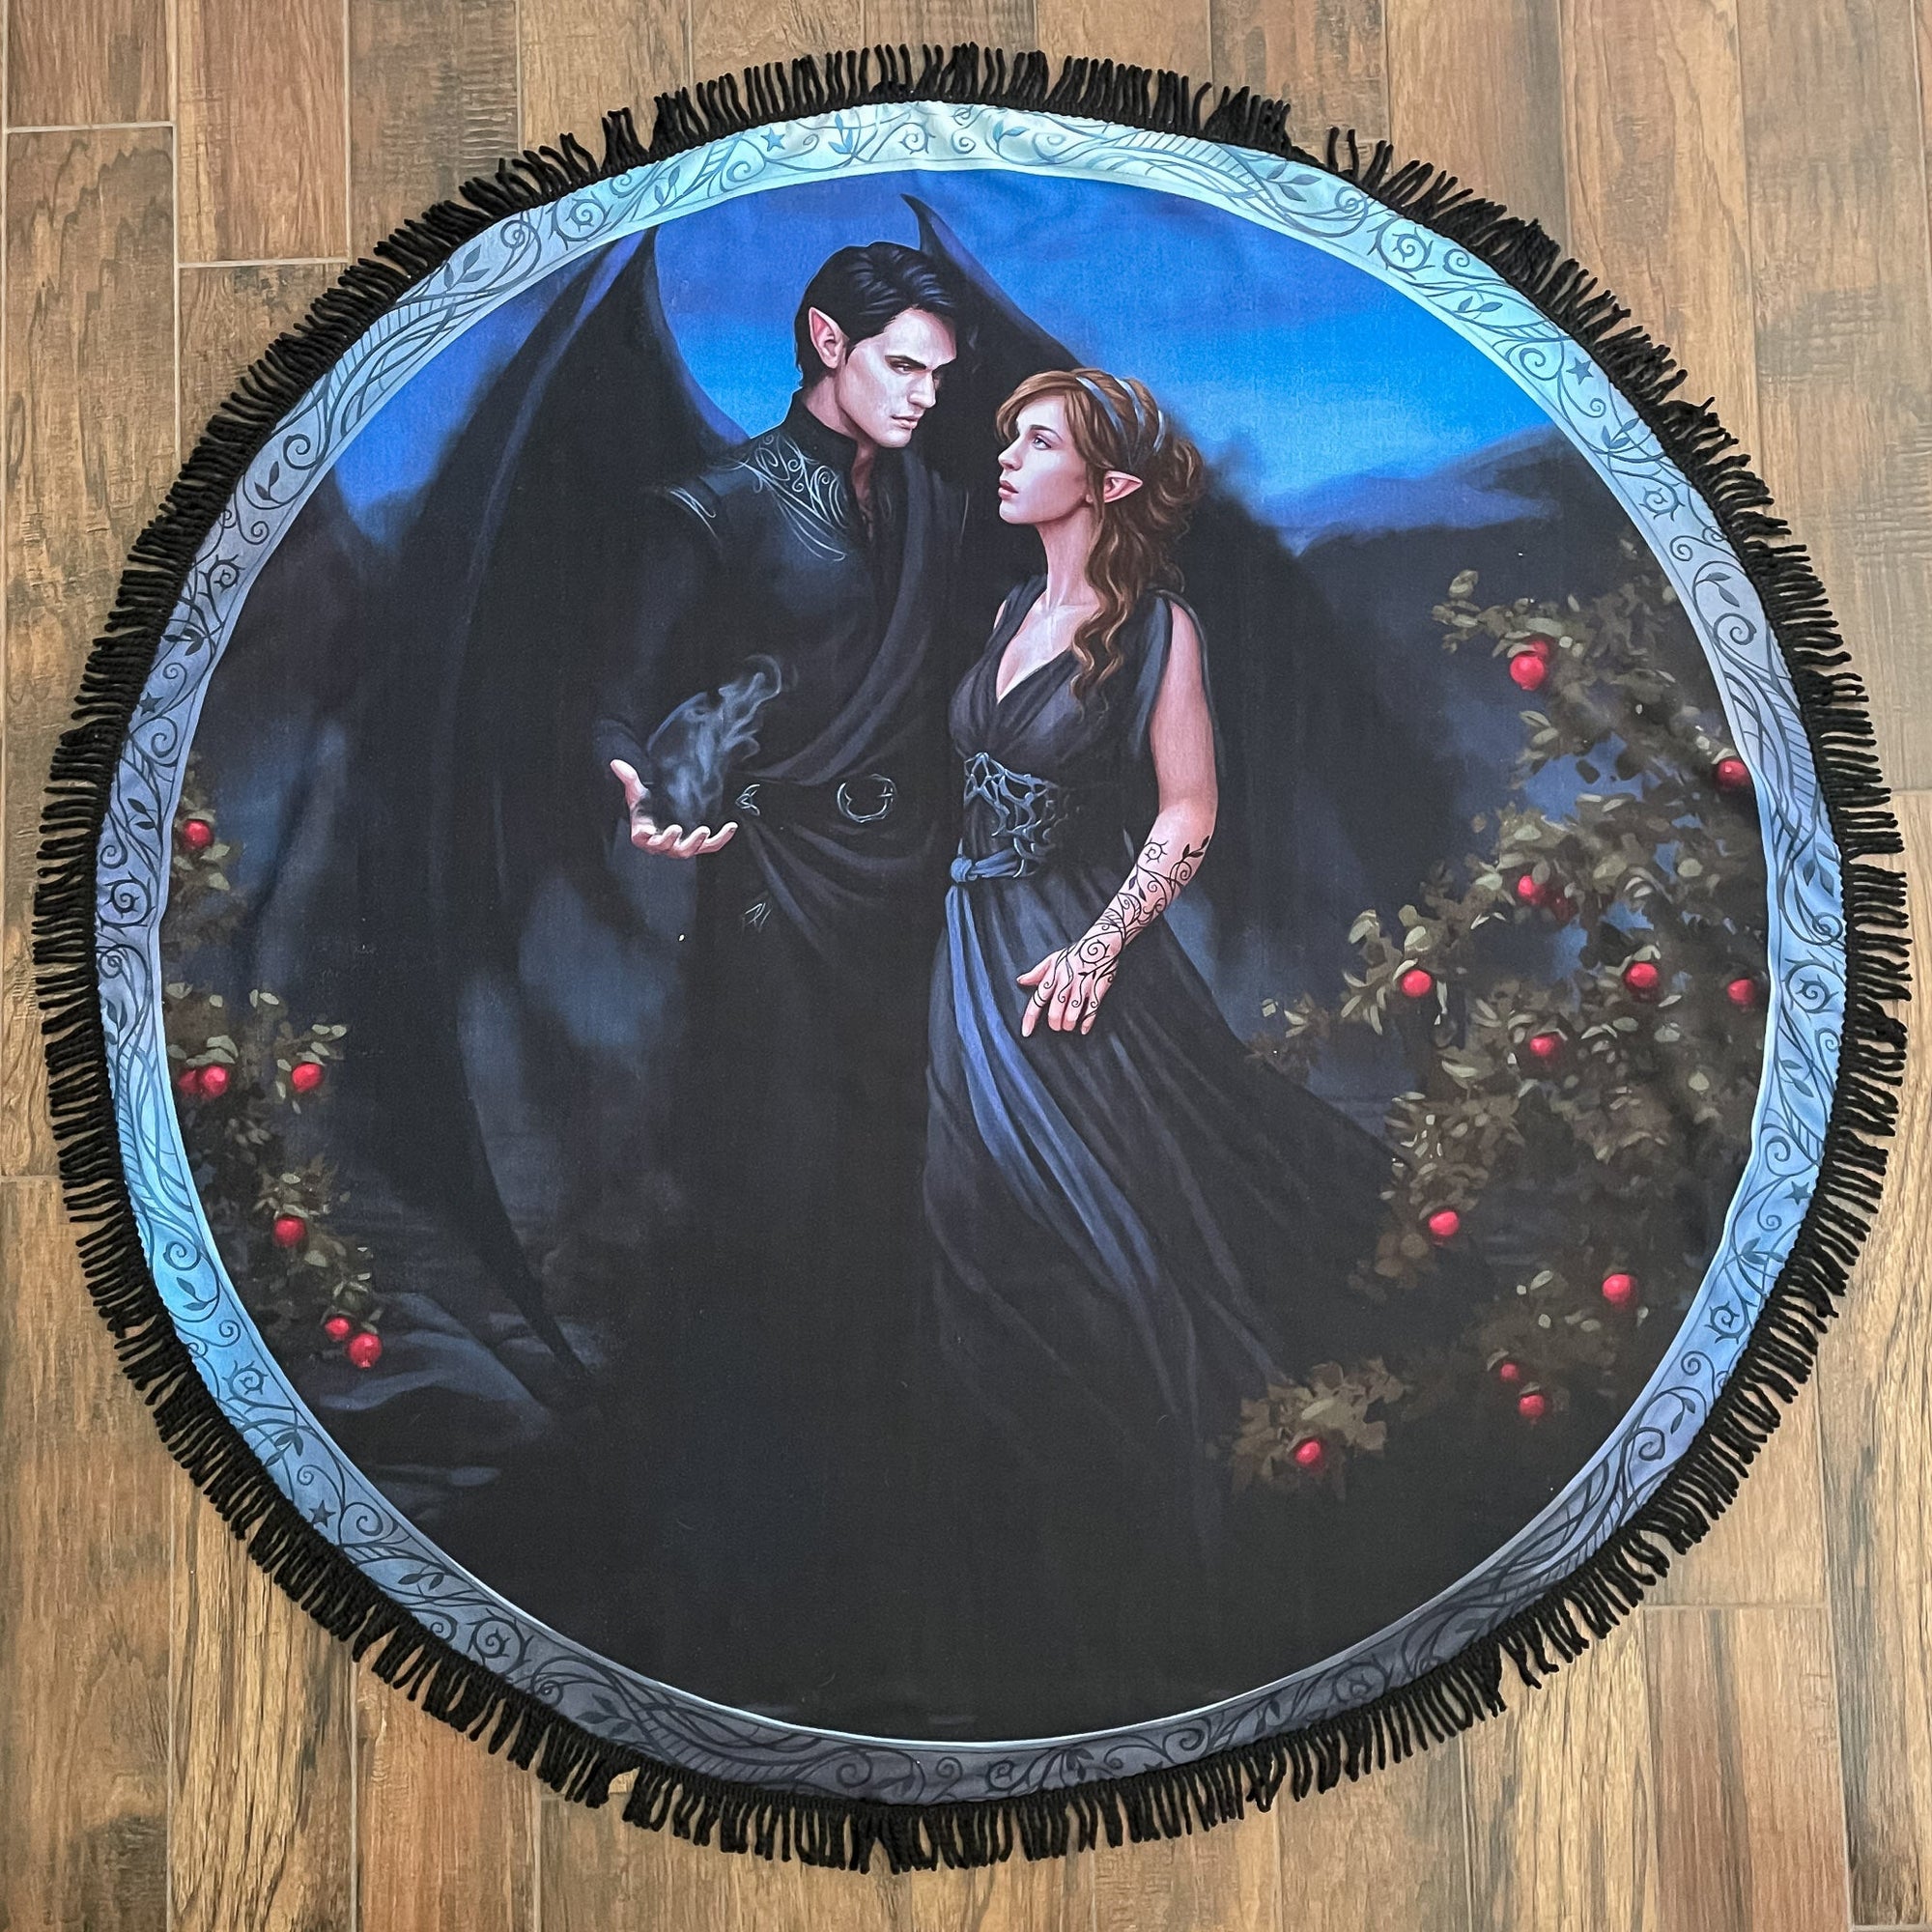 Round towel with fringe edge. Rhysand & Feyre in black. Rhysand has magic misting from his hand. Bushes of red fruit frame them.